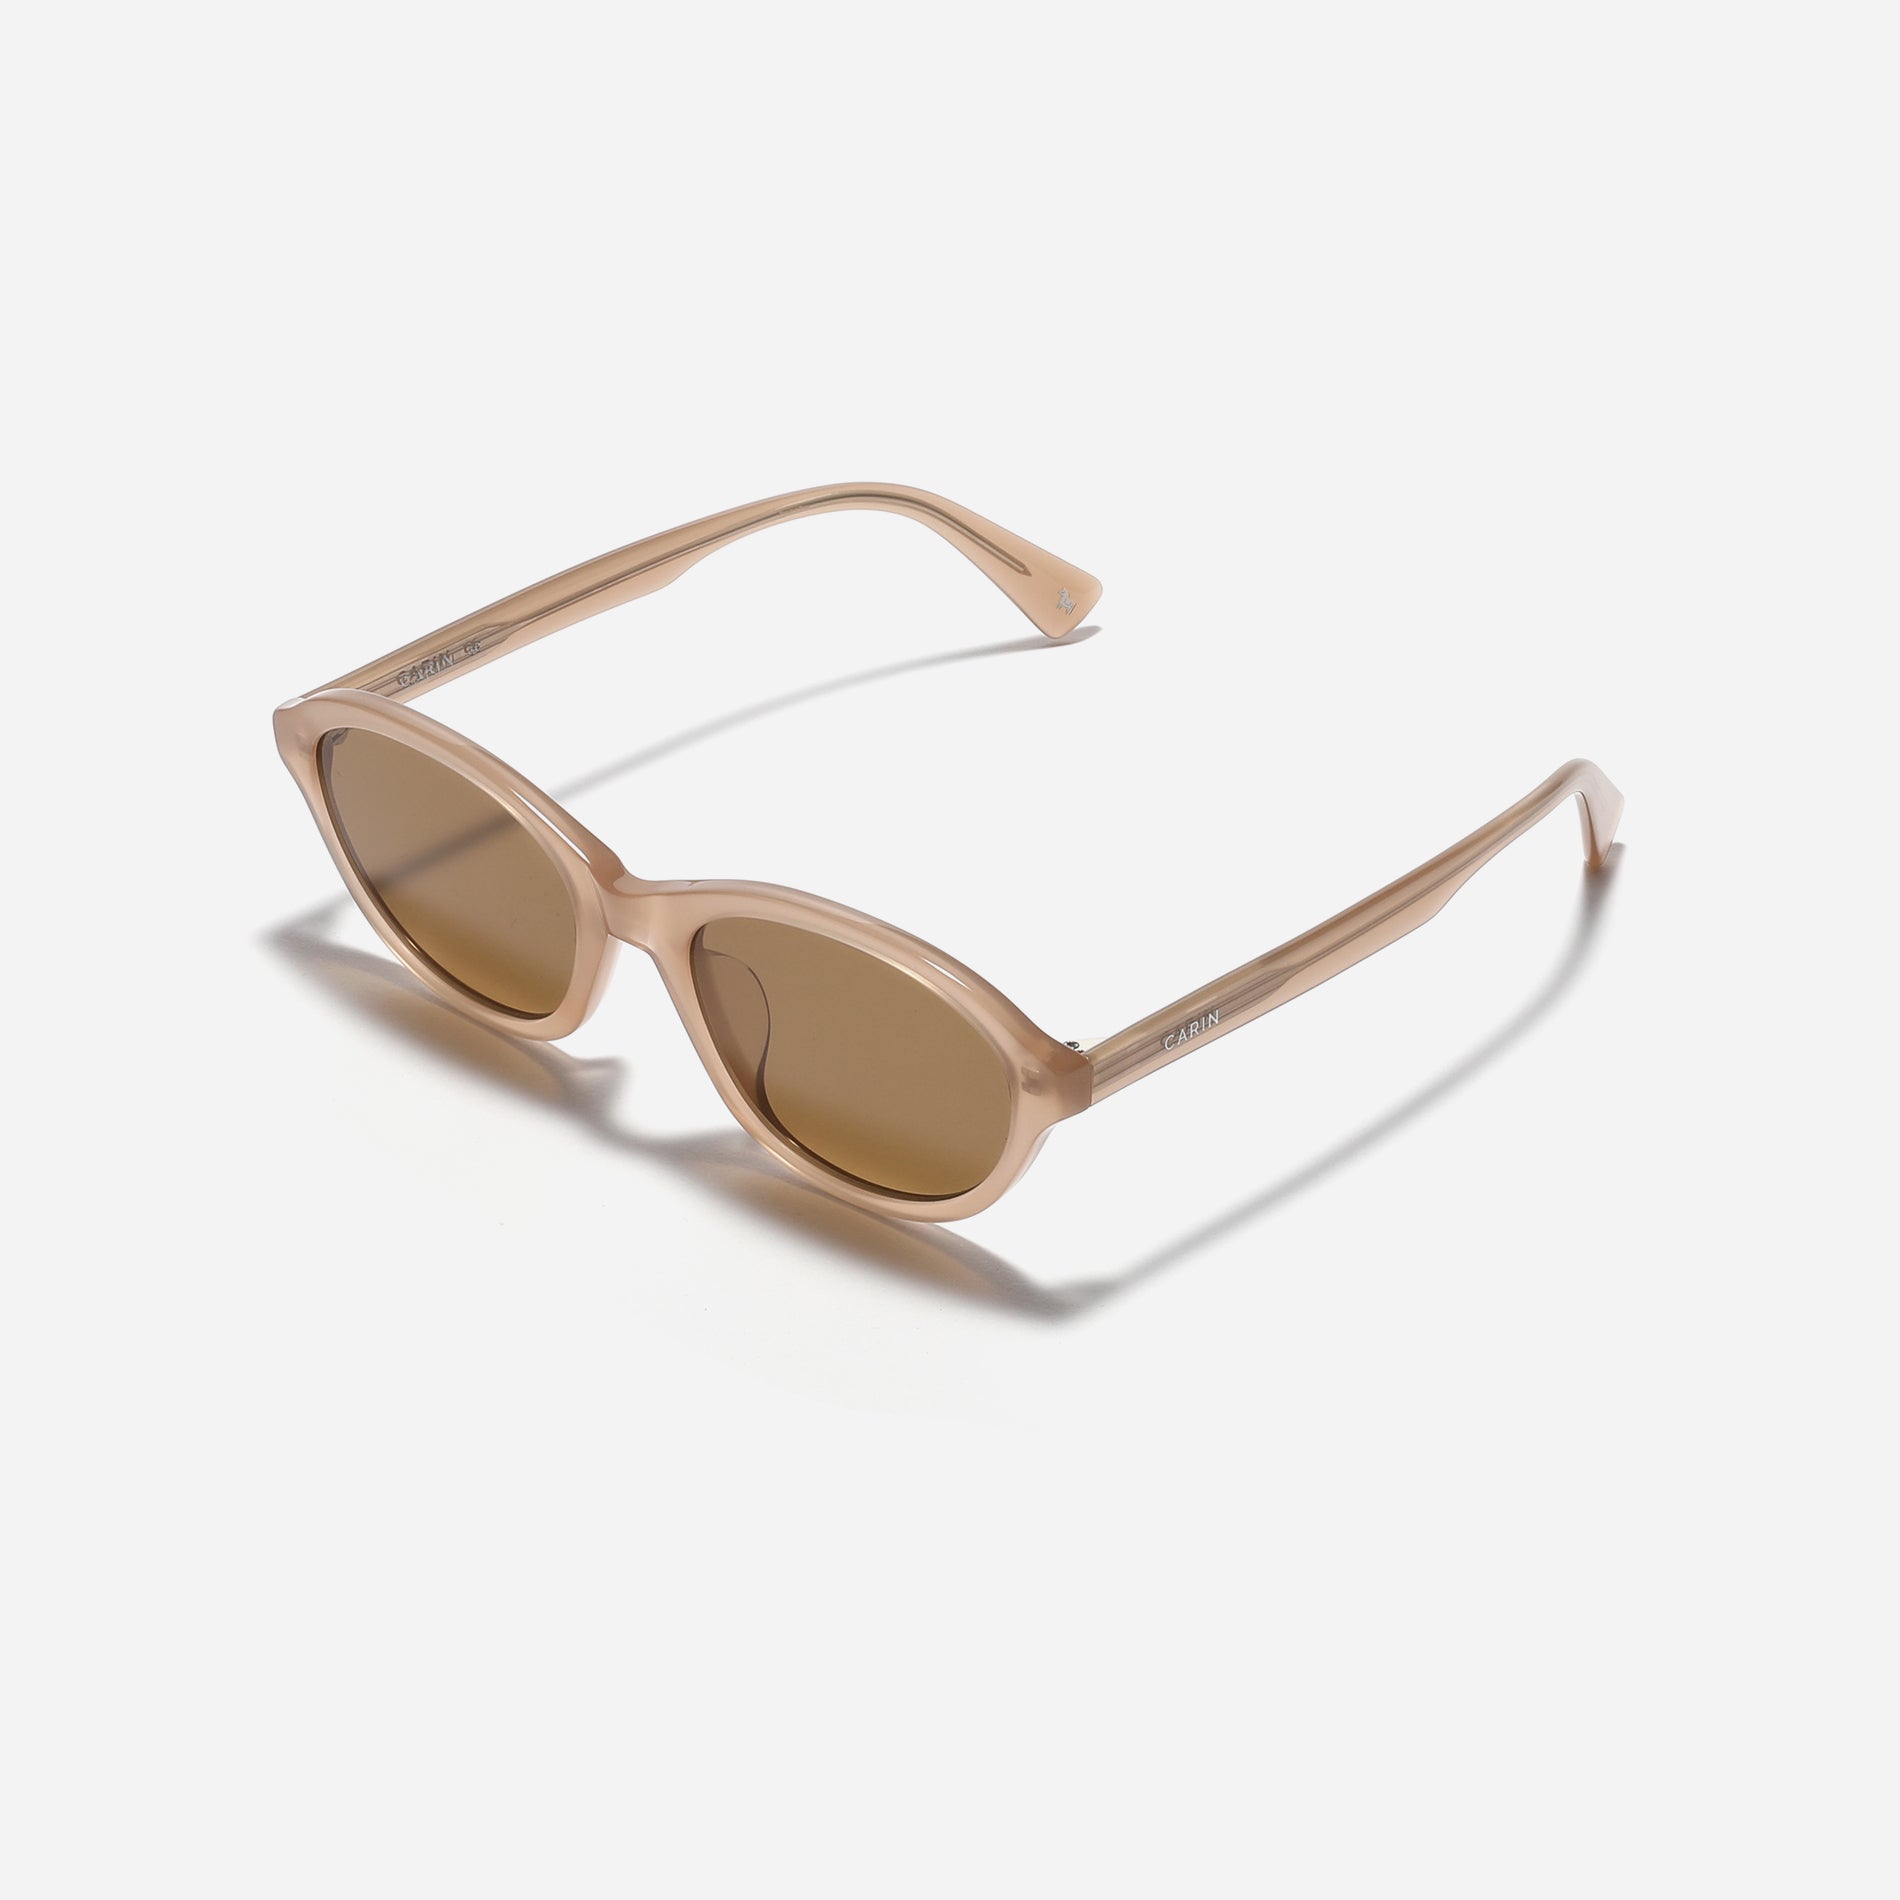 Round-shaped petite frame sunglasses. They feature a narrow retro-inspired design from the '80s, reinterpreted with a modern touch. Additionally, soft color variations effortlessly complement various face shapes, making Makea a fashion-forward choice for a stylish look.